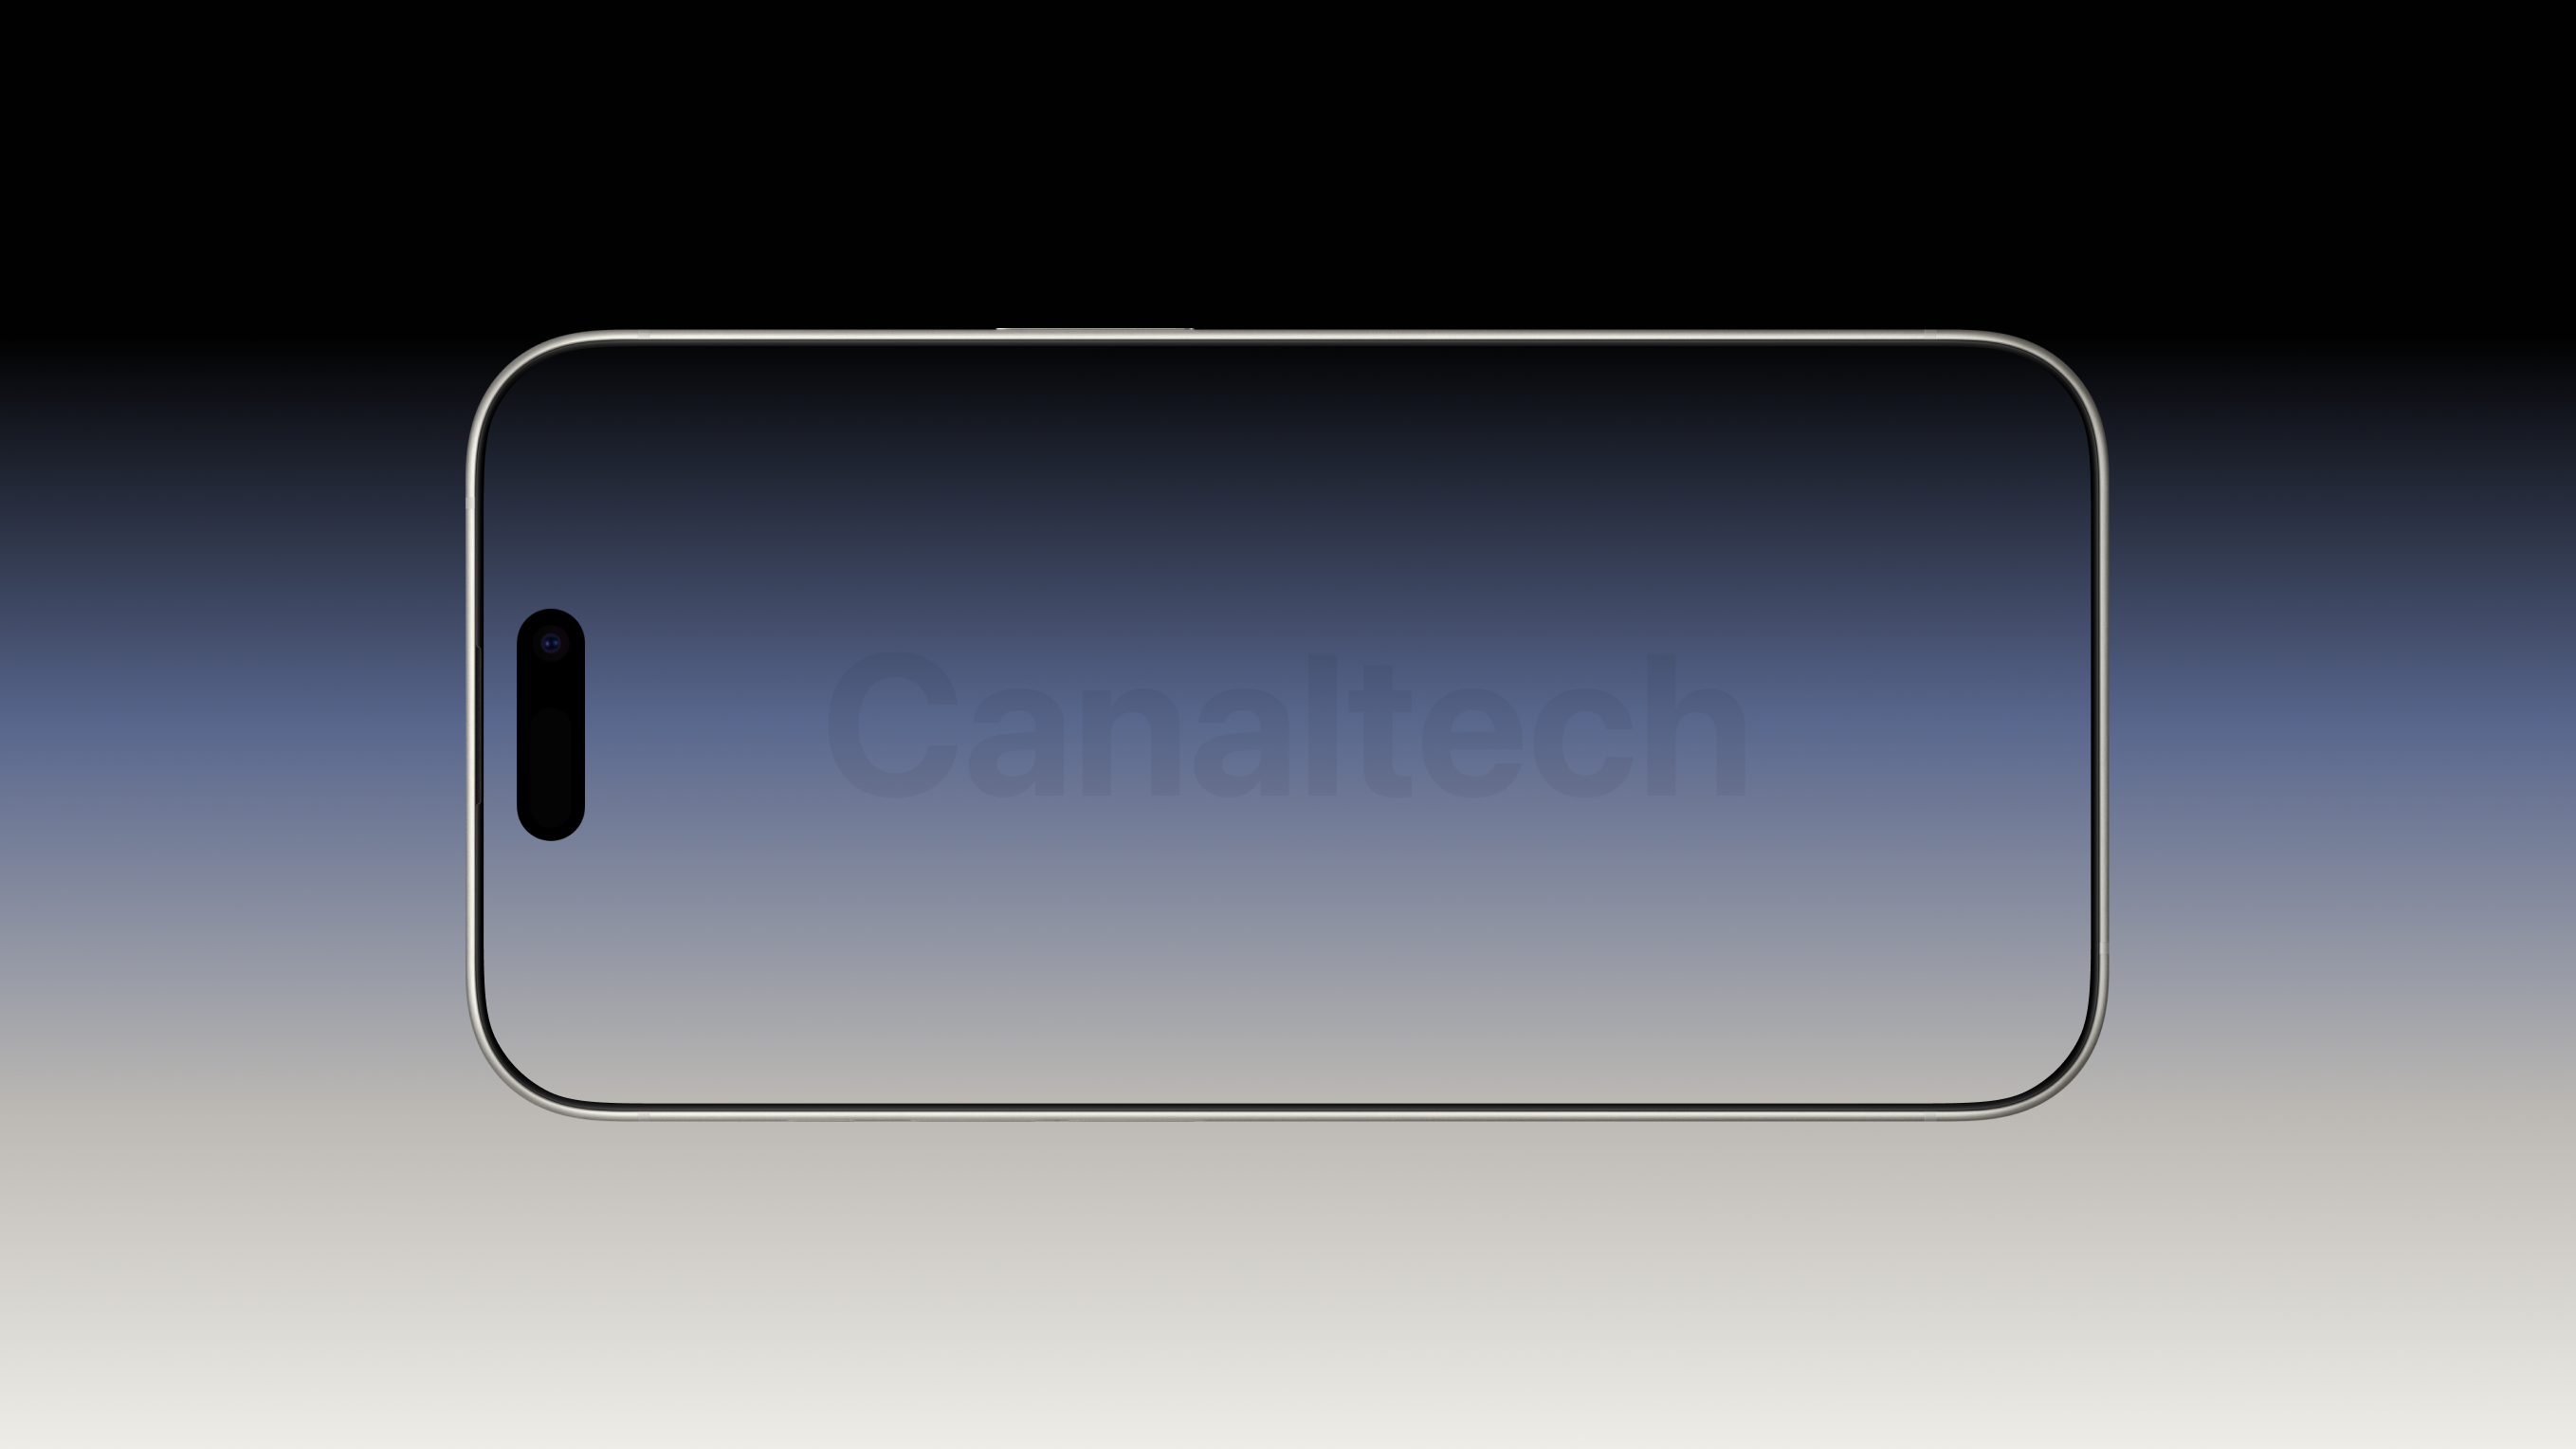 Rumors say that the iPhone 16 Pro will have a display with the world’s thinnest bezels